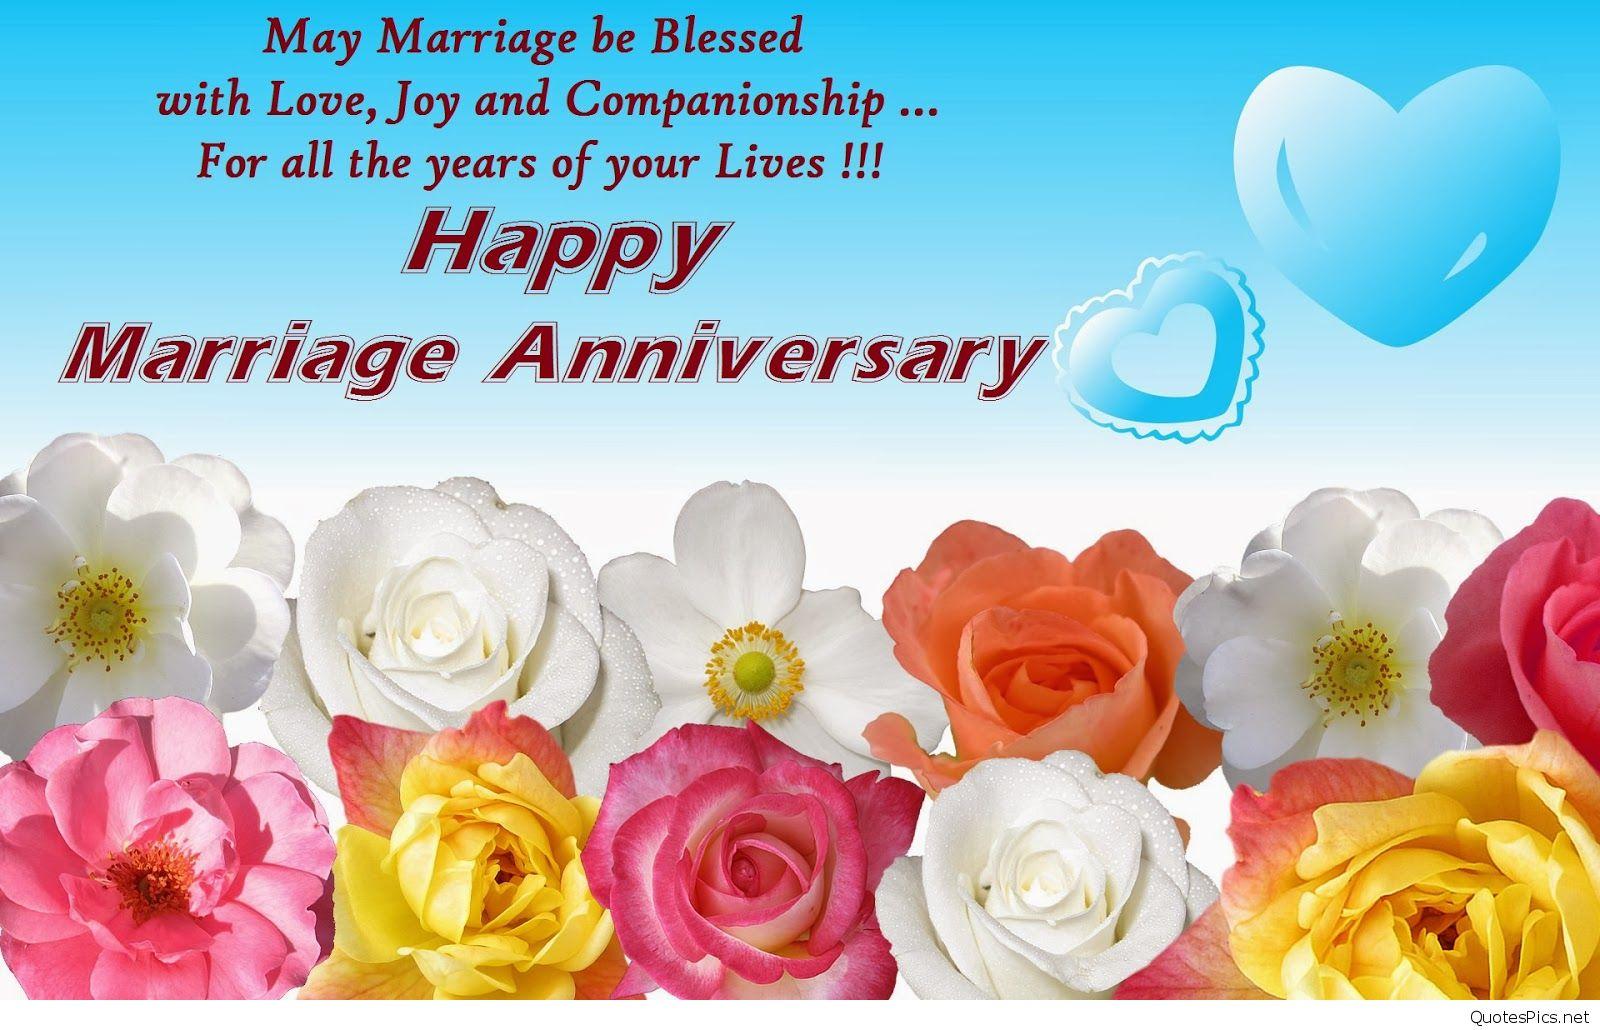 Happy Marriage Anniversary Quotes. QUOTES OF THE DAY